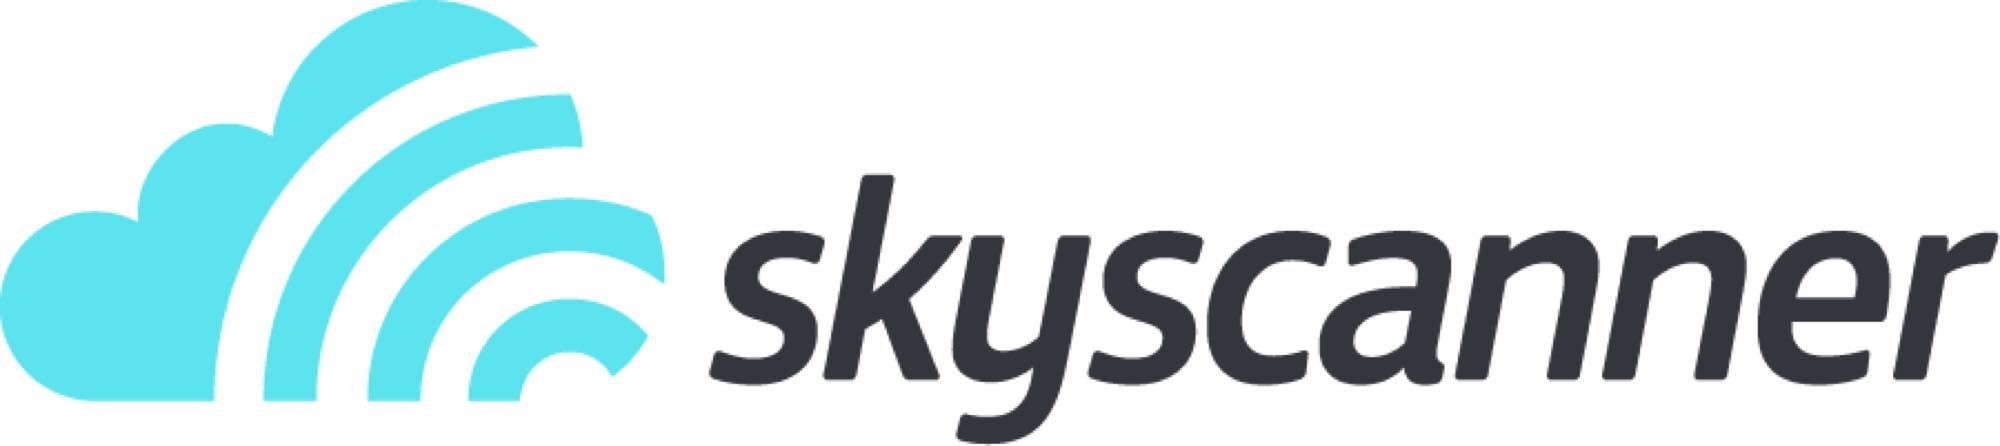 skyscanner_howto1